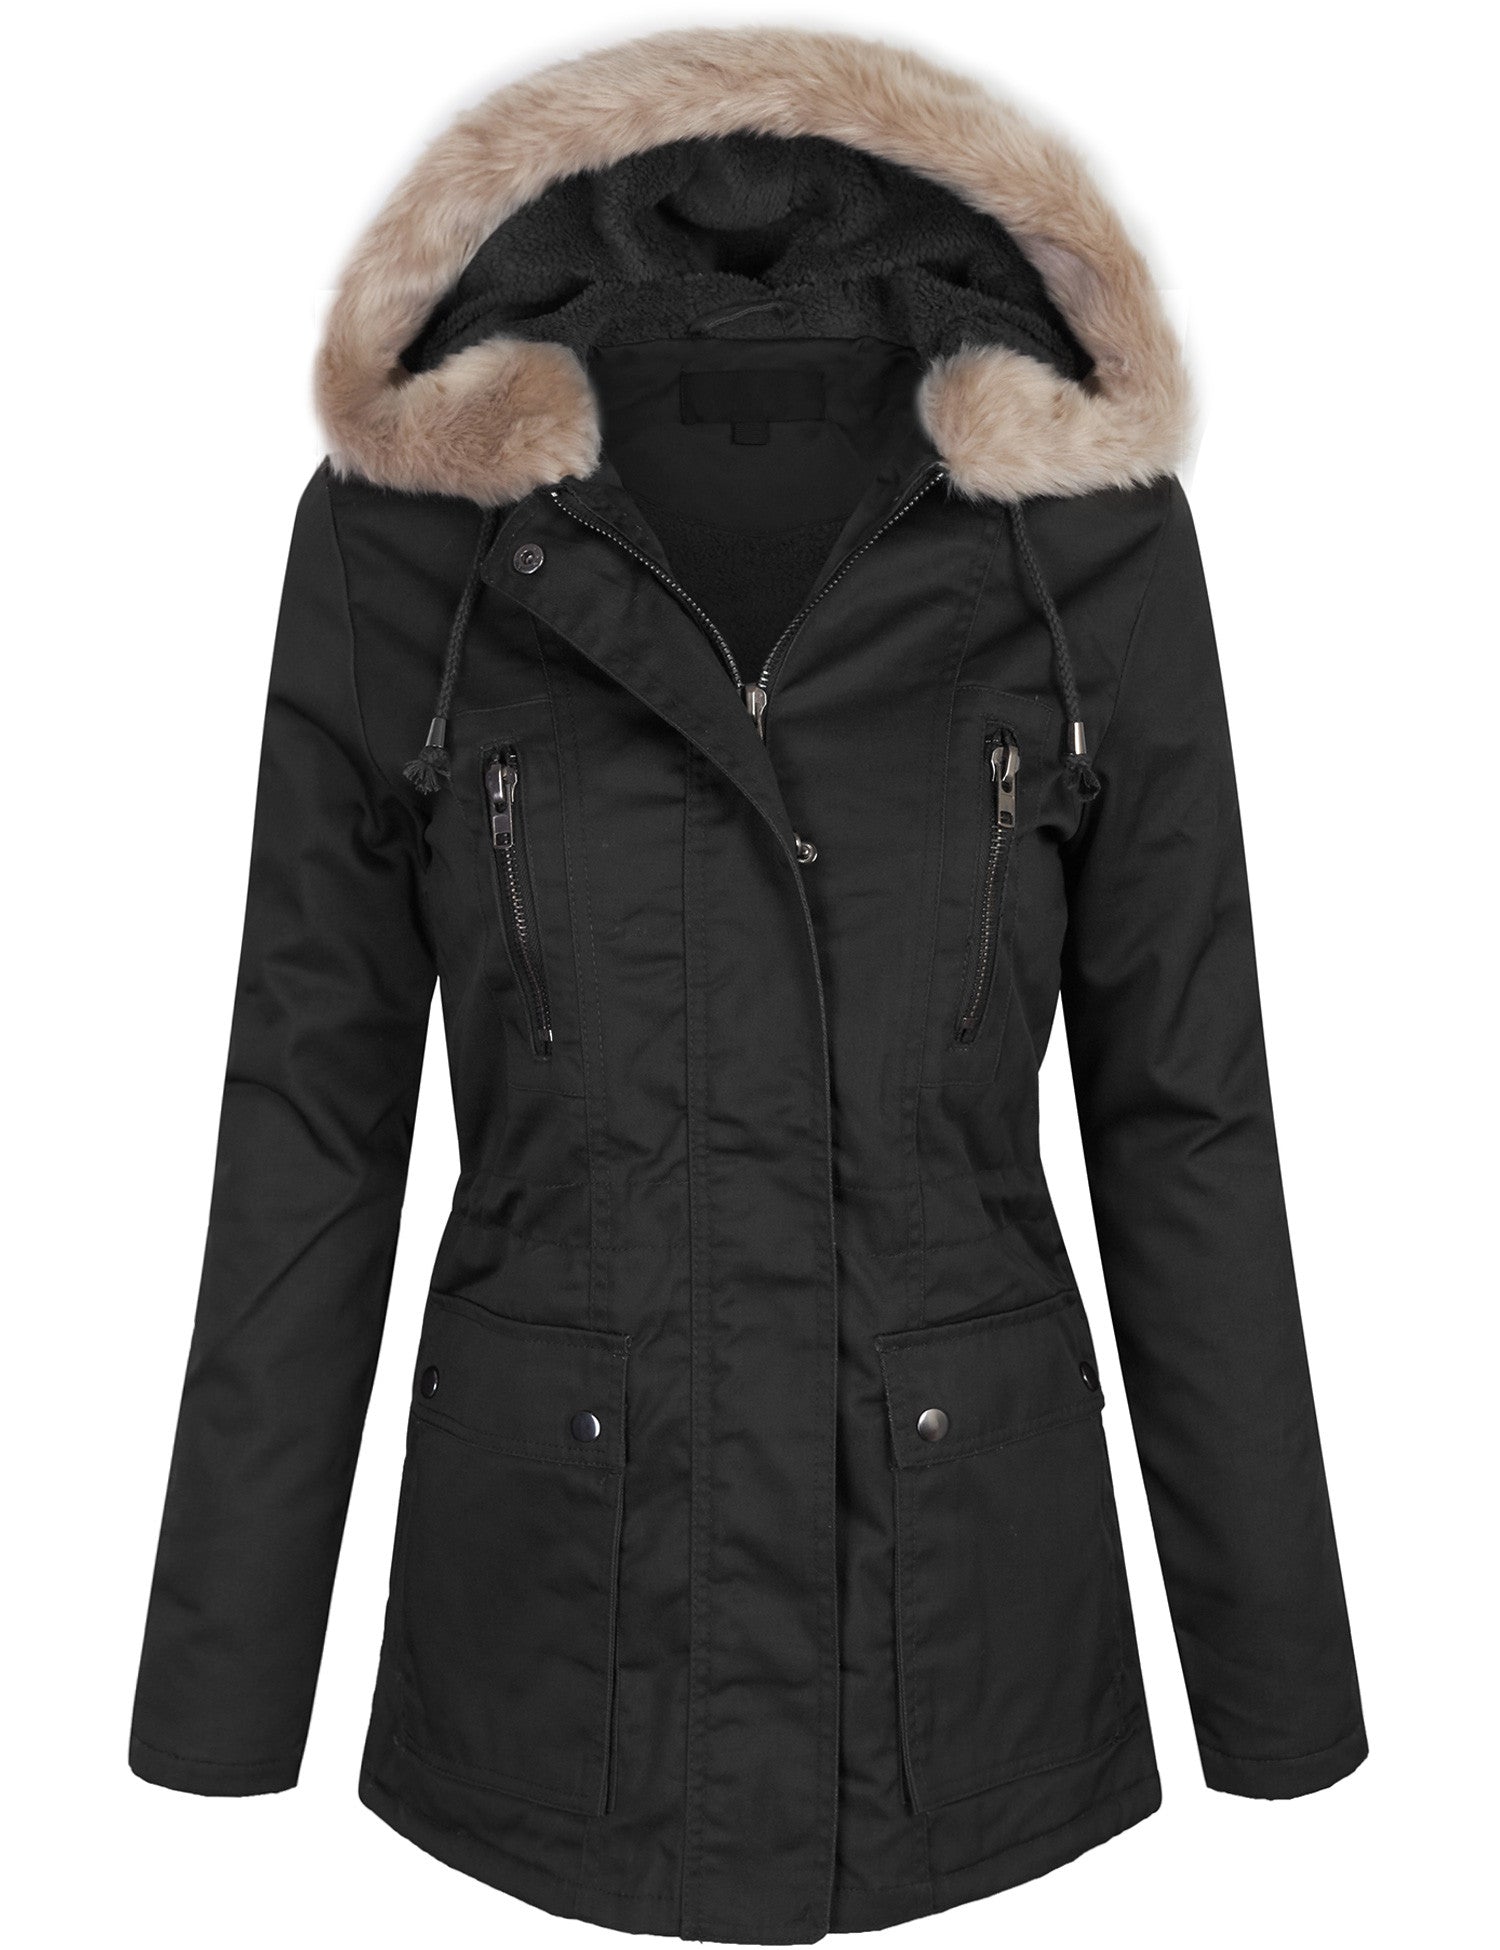 Zip Up Utility Jacket Coat with Faux Fur Lining and Hoodie - KOGMO